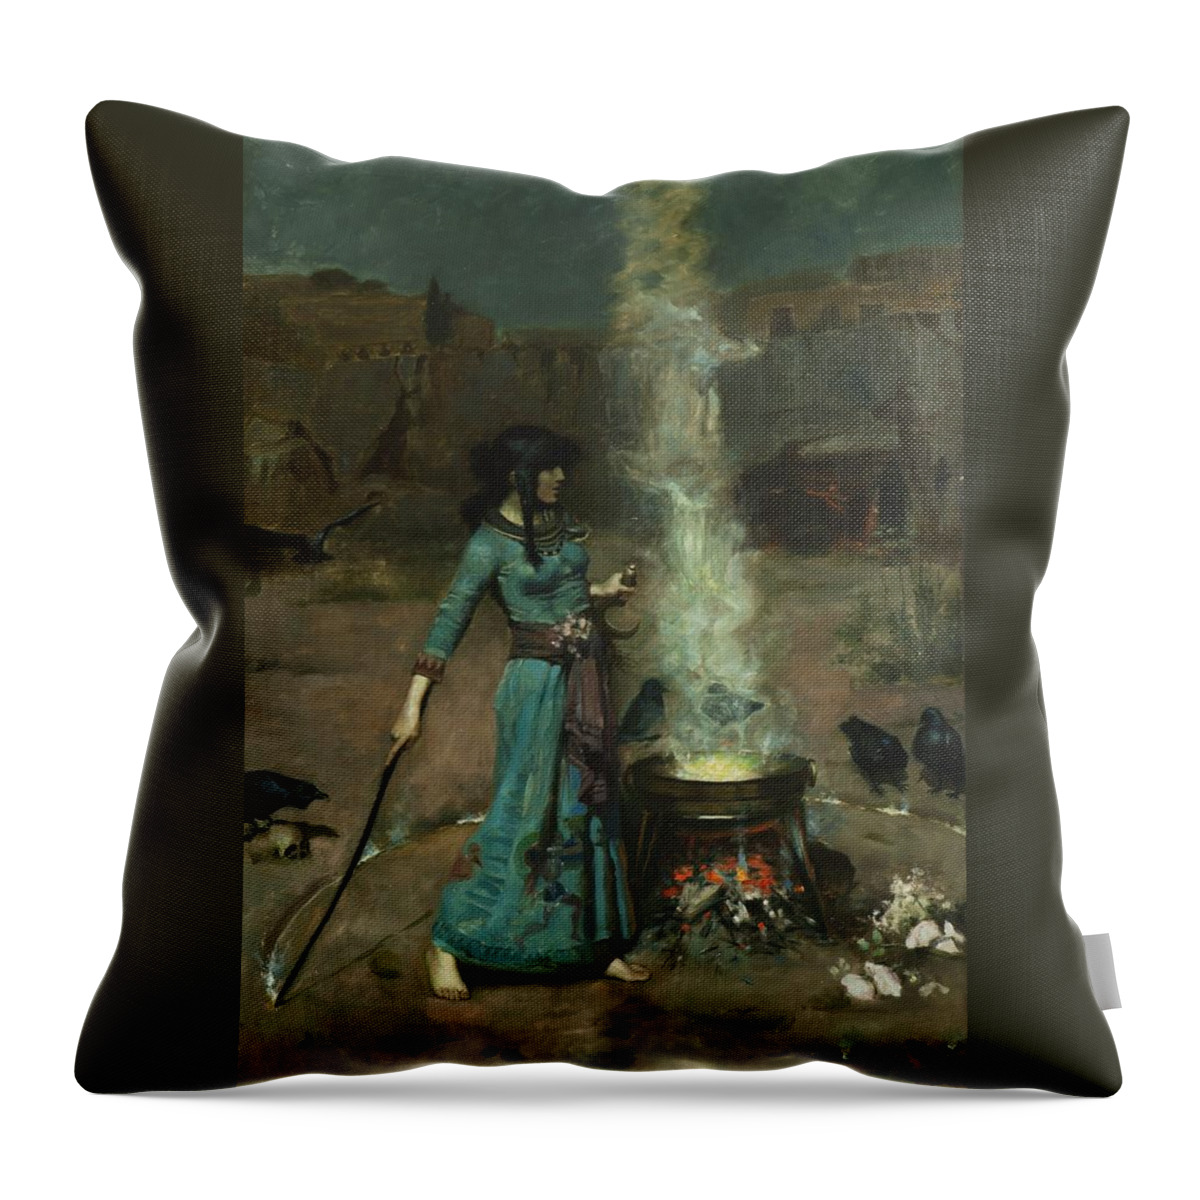 John William Waterhouse 1849-1917 The Magic Circle Throw Pillow featuring the painting The Magic Circle by MotionAge Designs